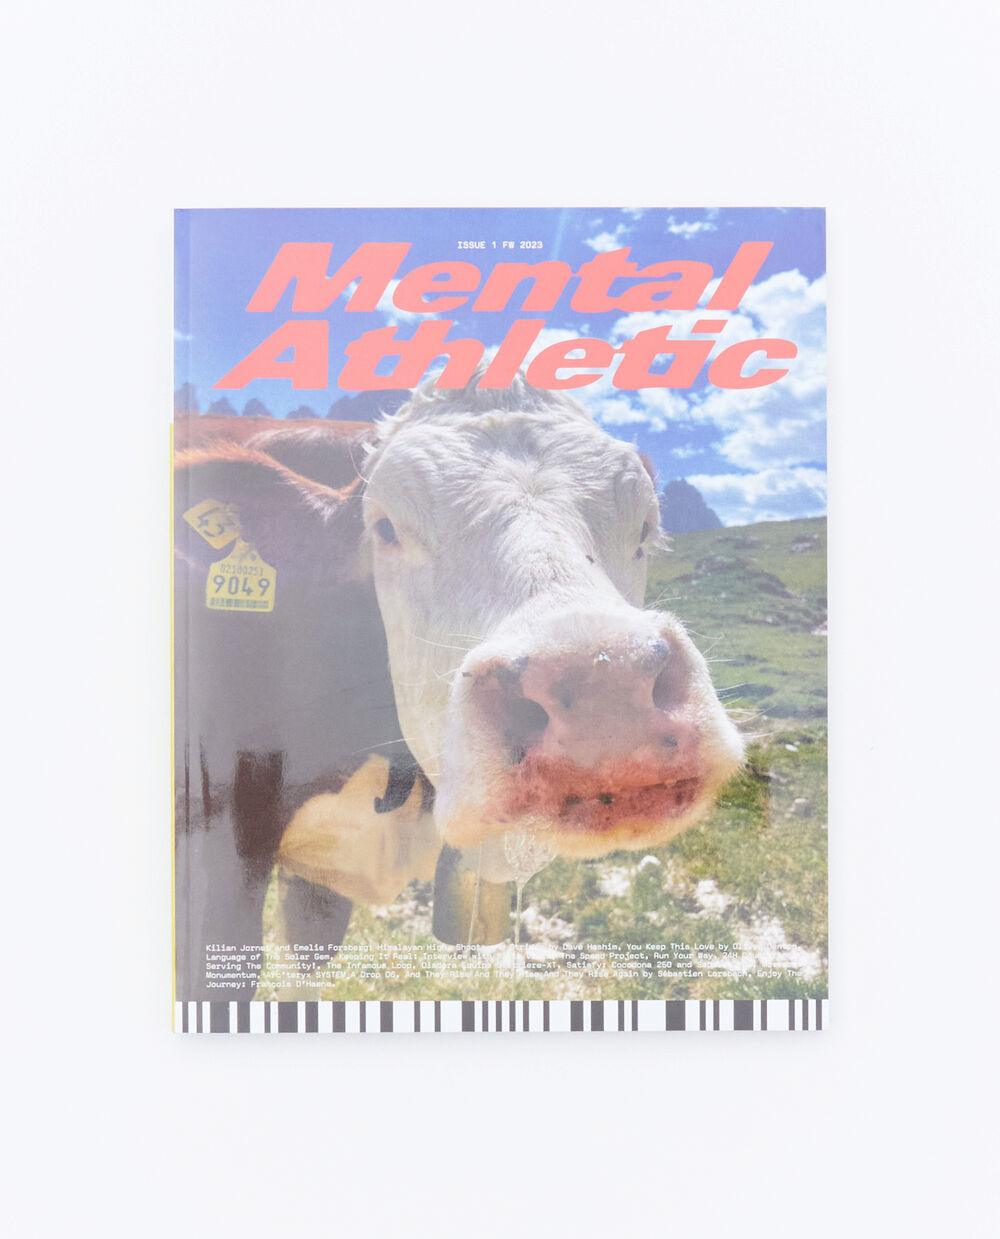 MENTAL ATHLETIC MENTAL ATHLETIC ISSUE 1 - COVER 4 W/ COWS